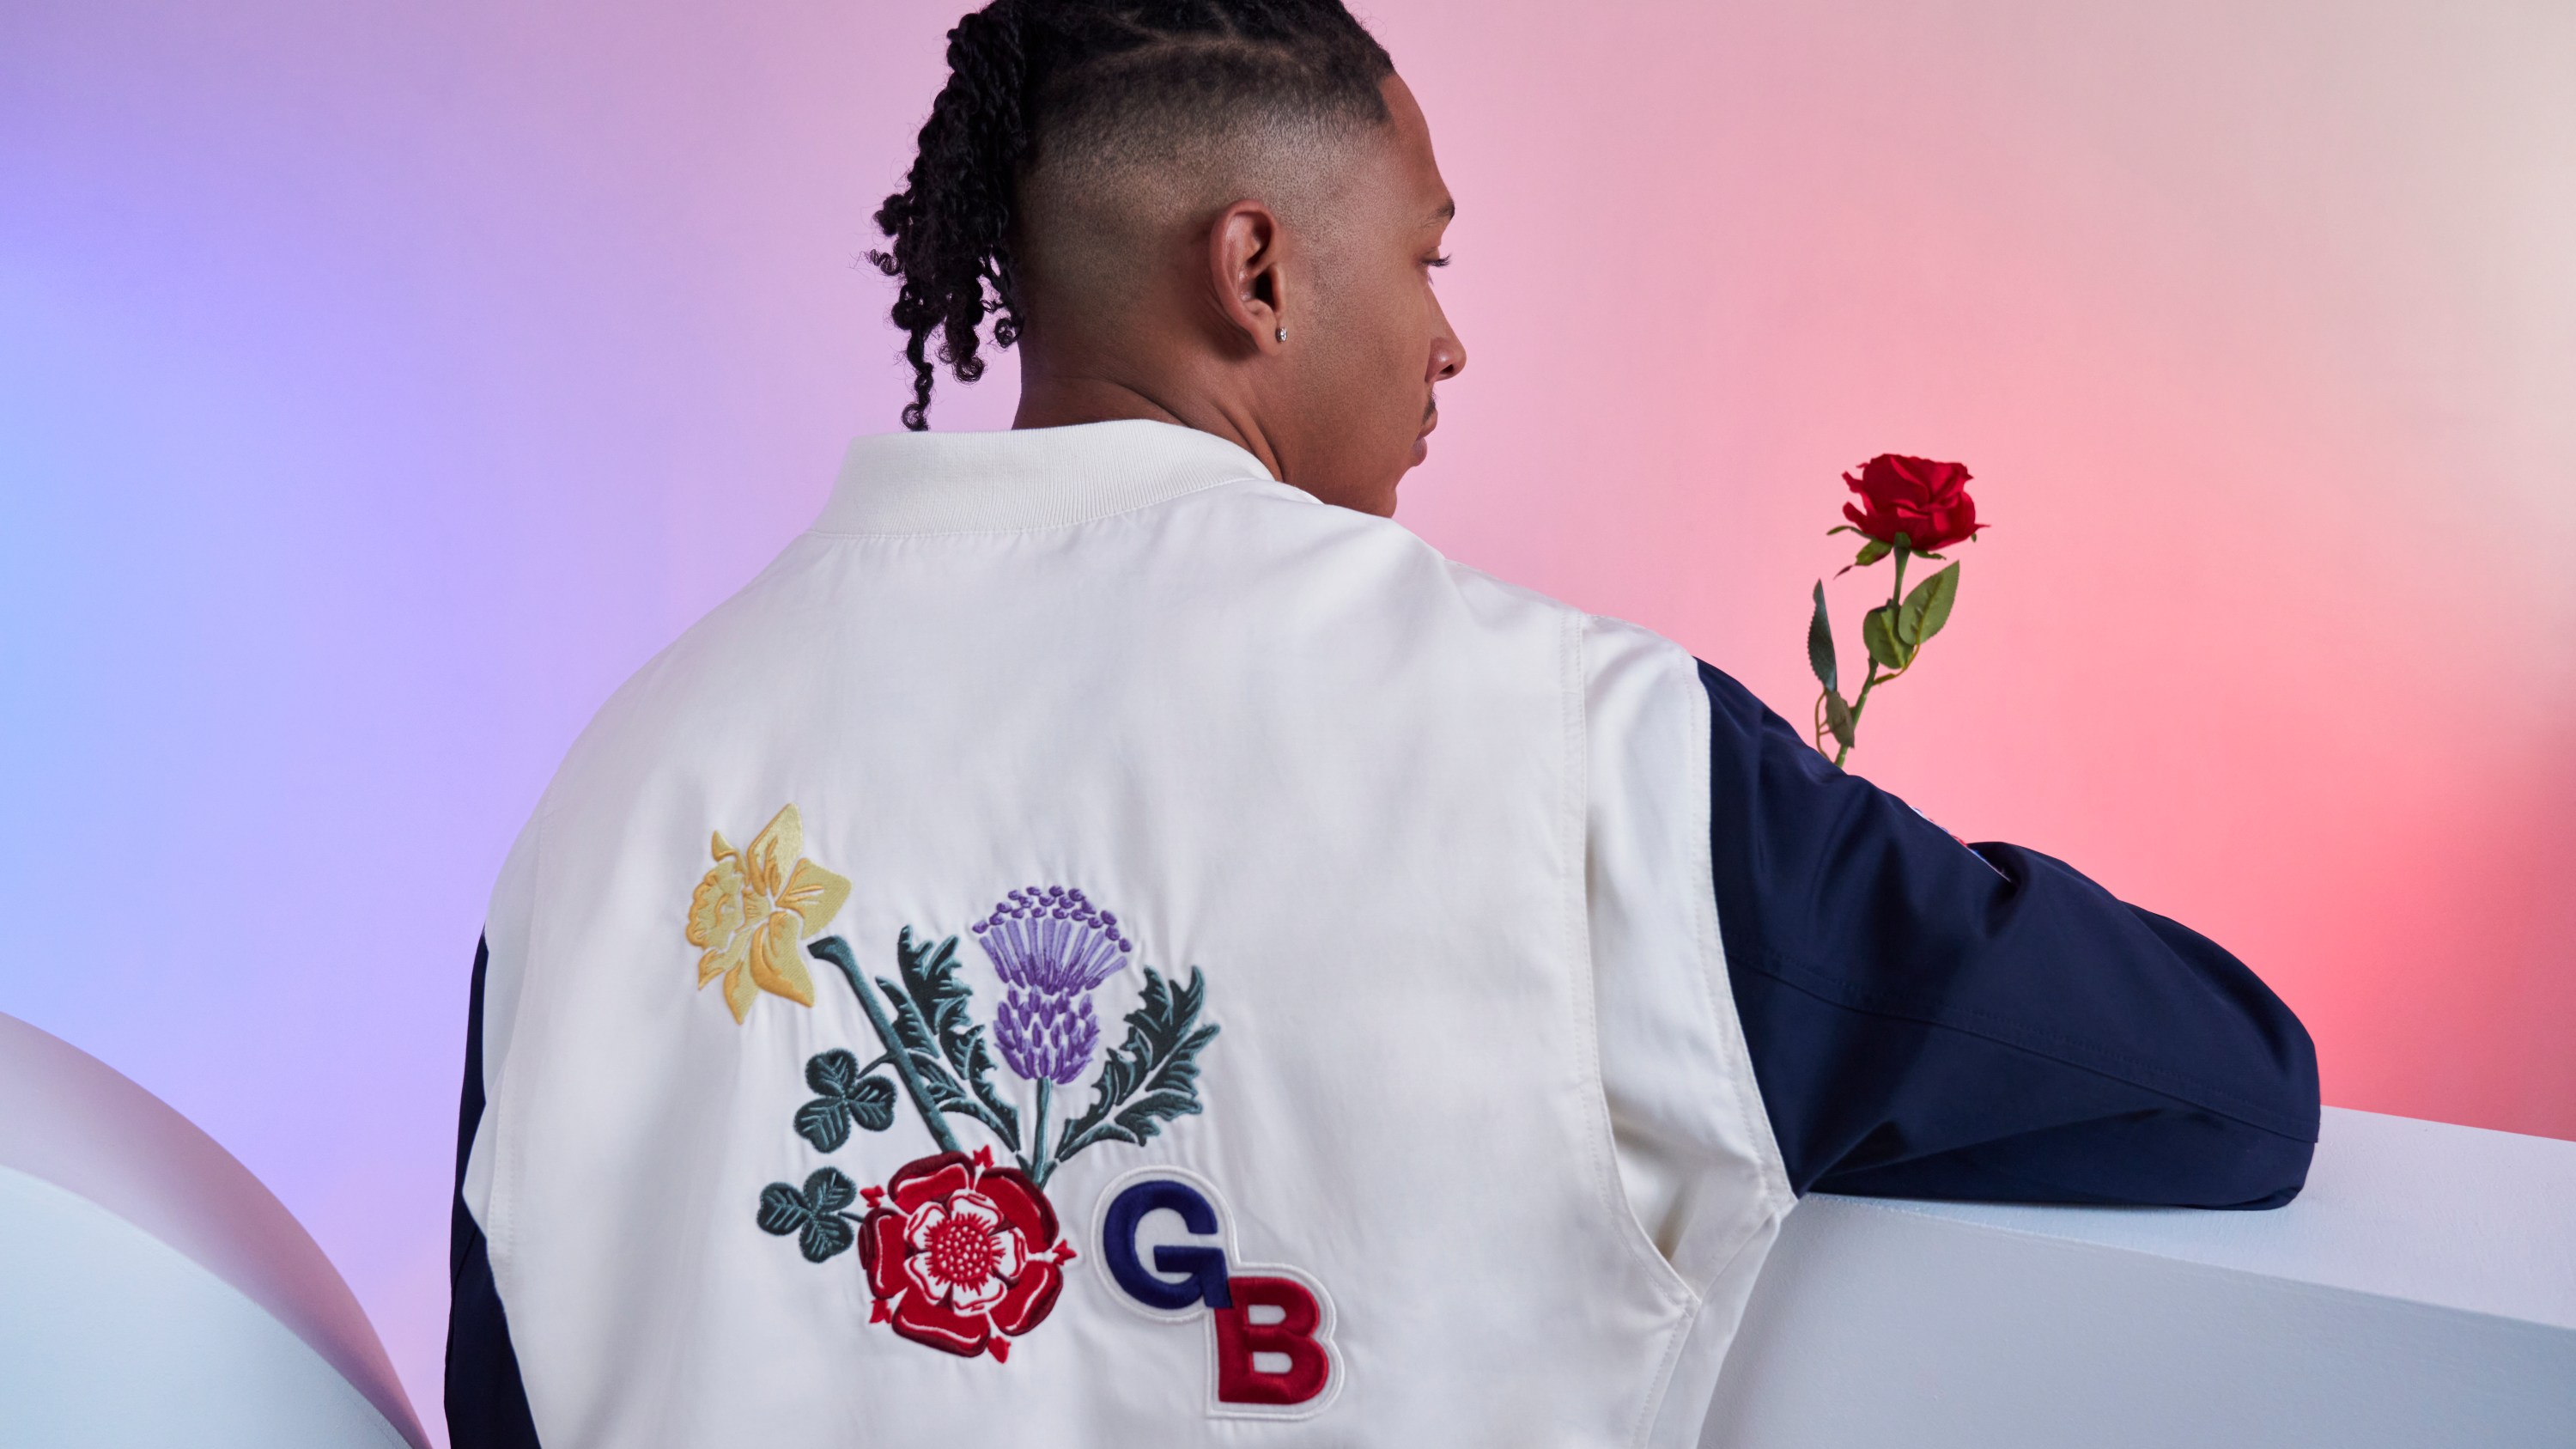 An athlete wears the Team GB jacket.